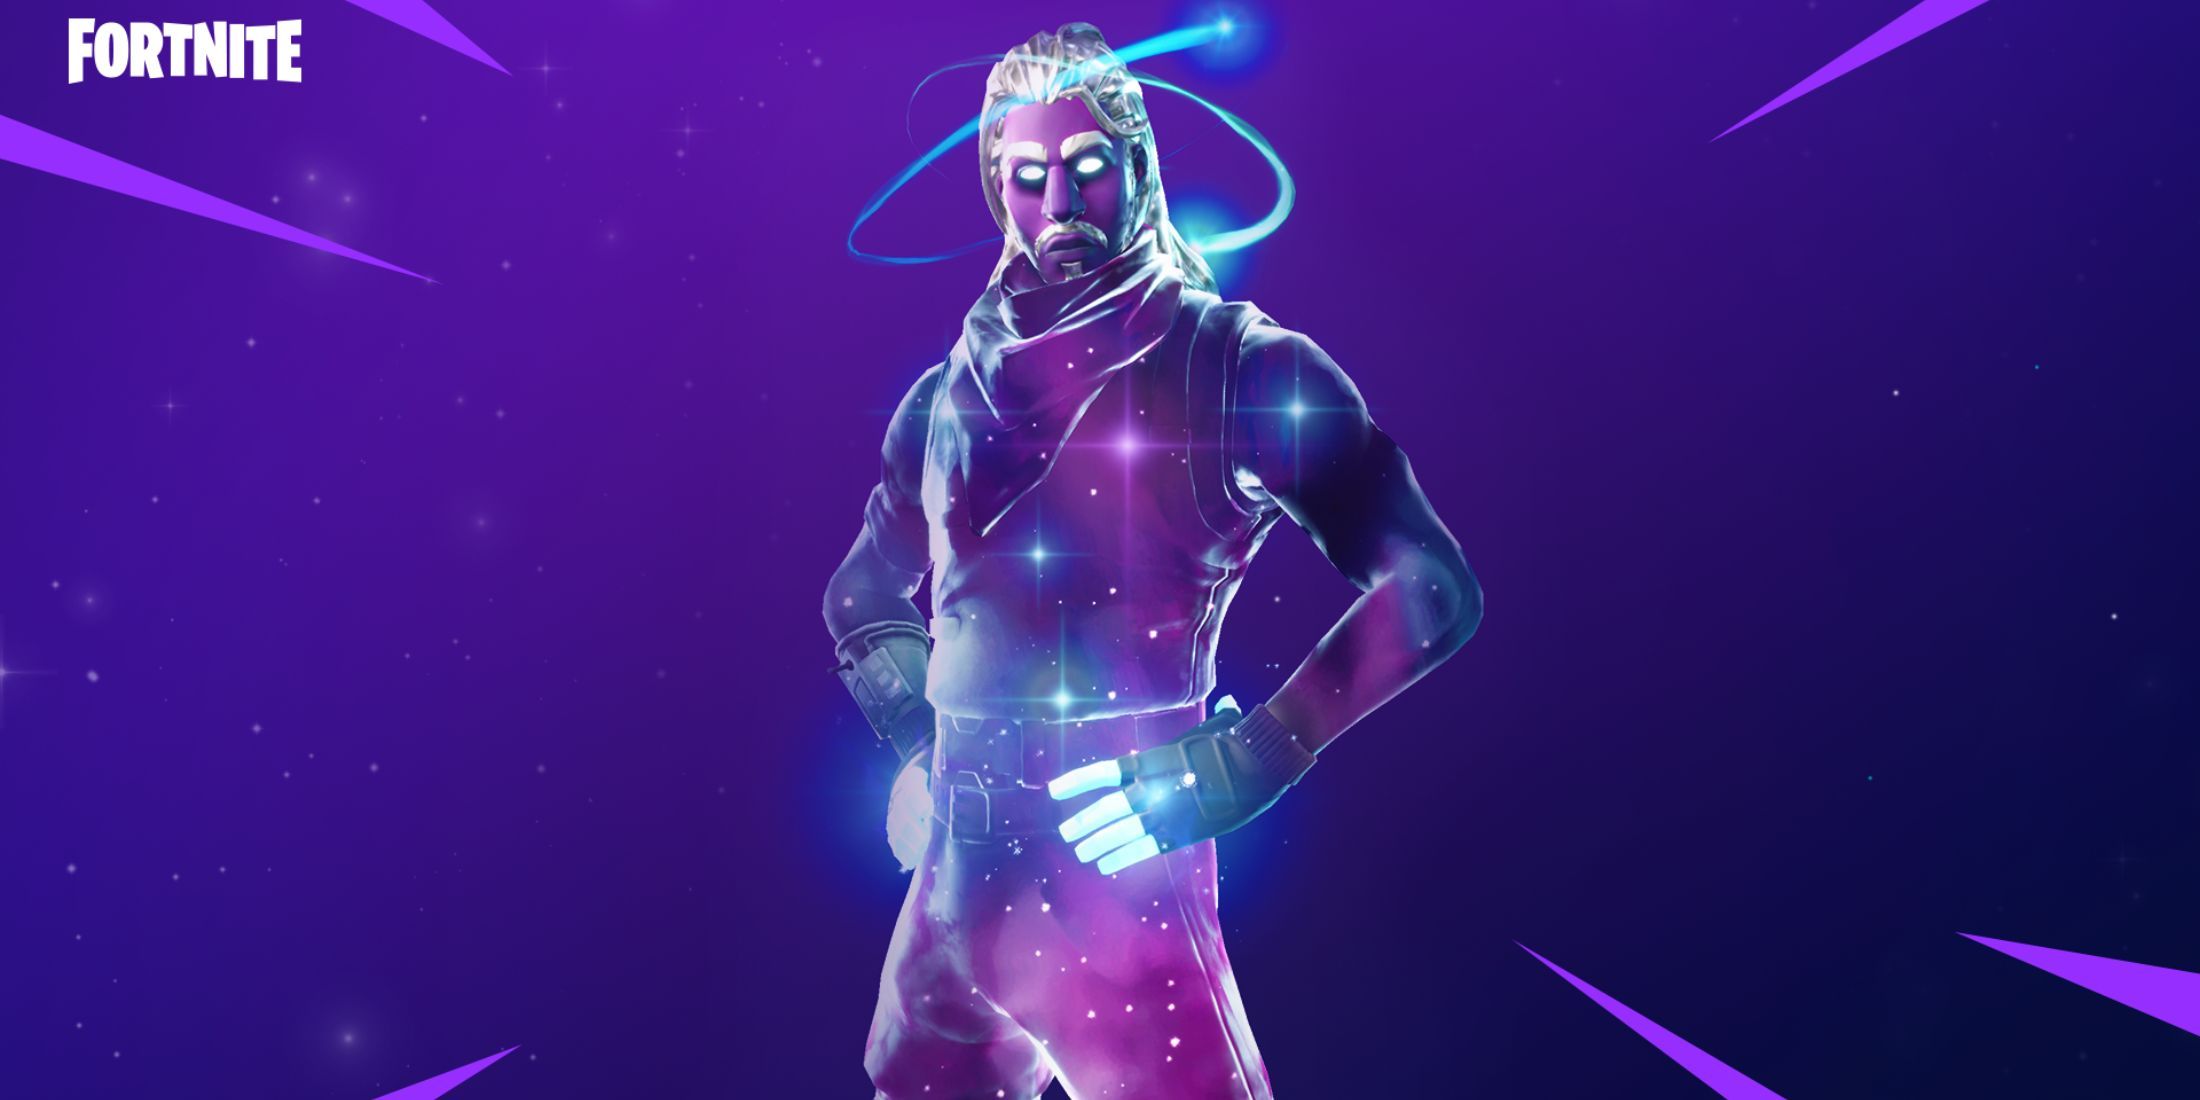 Exclusive Samsung Galaxy Skin for Fortnite